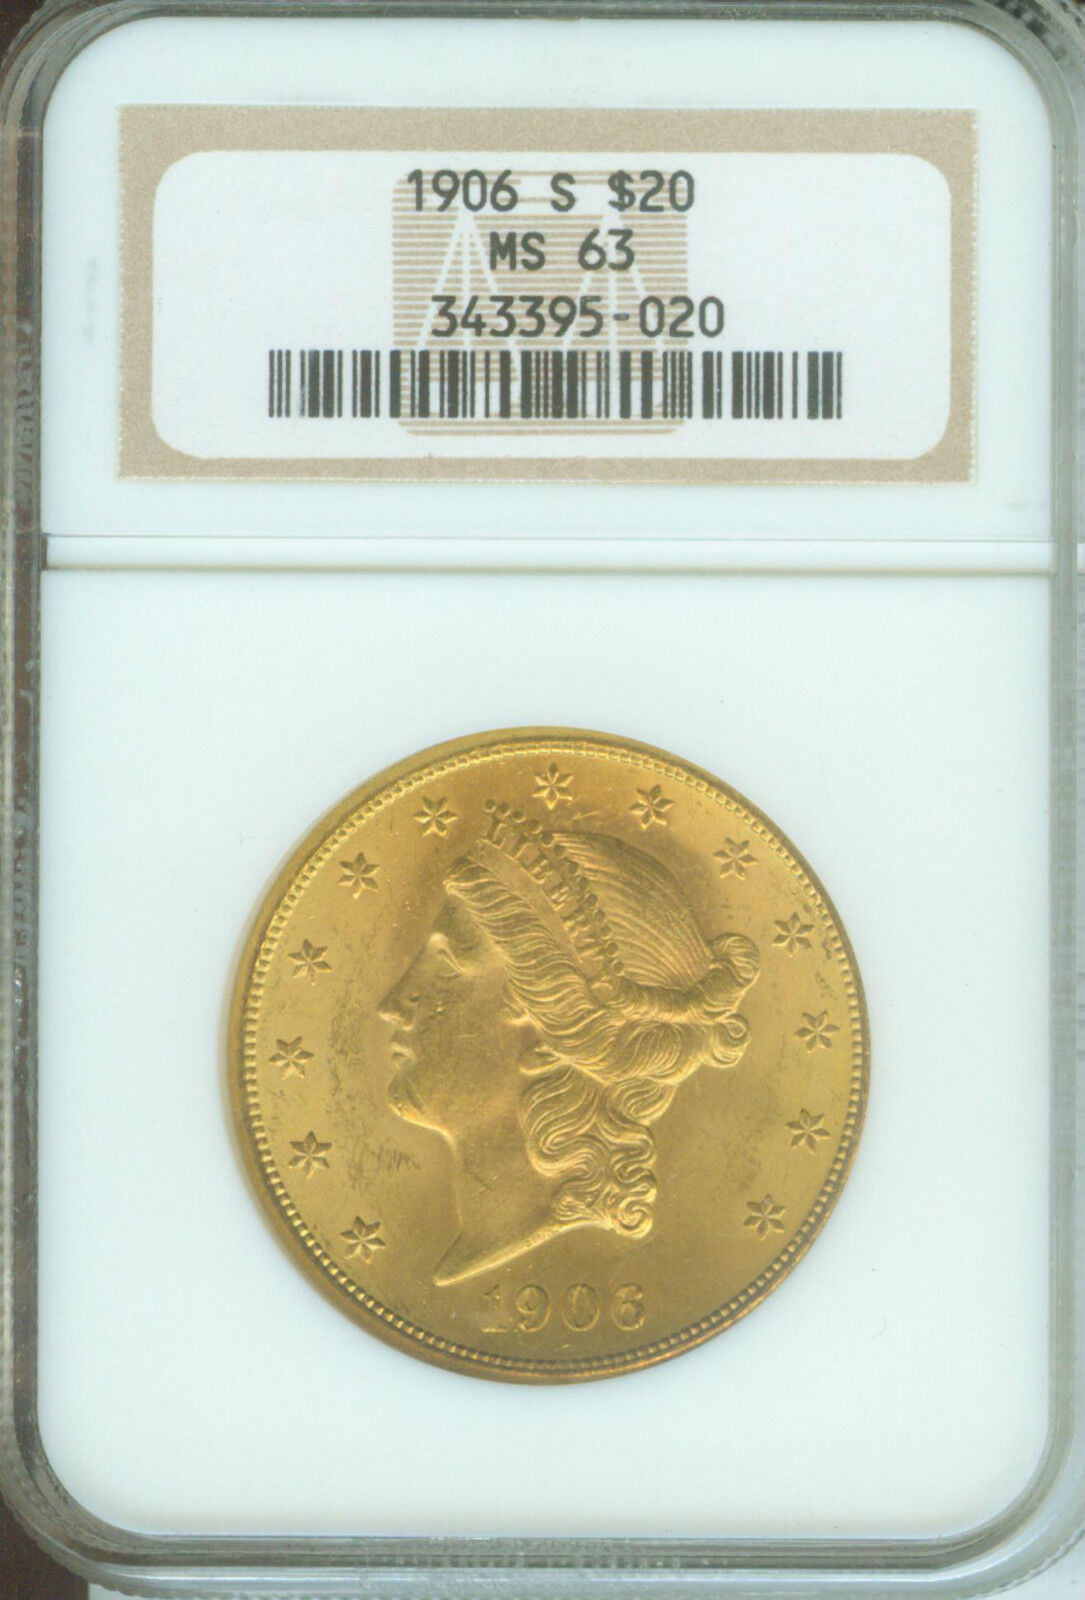 1906-S $20 LIBERTY NGC MS63 GOLD COIN MS-63  OLD HOLDER